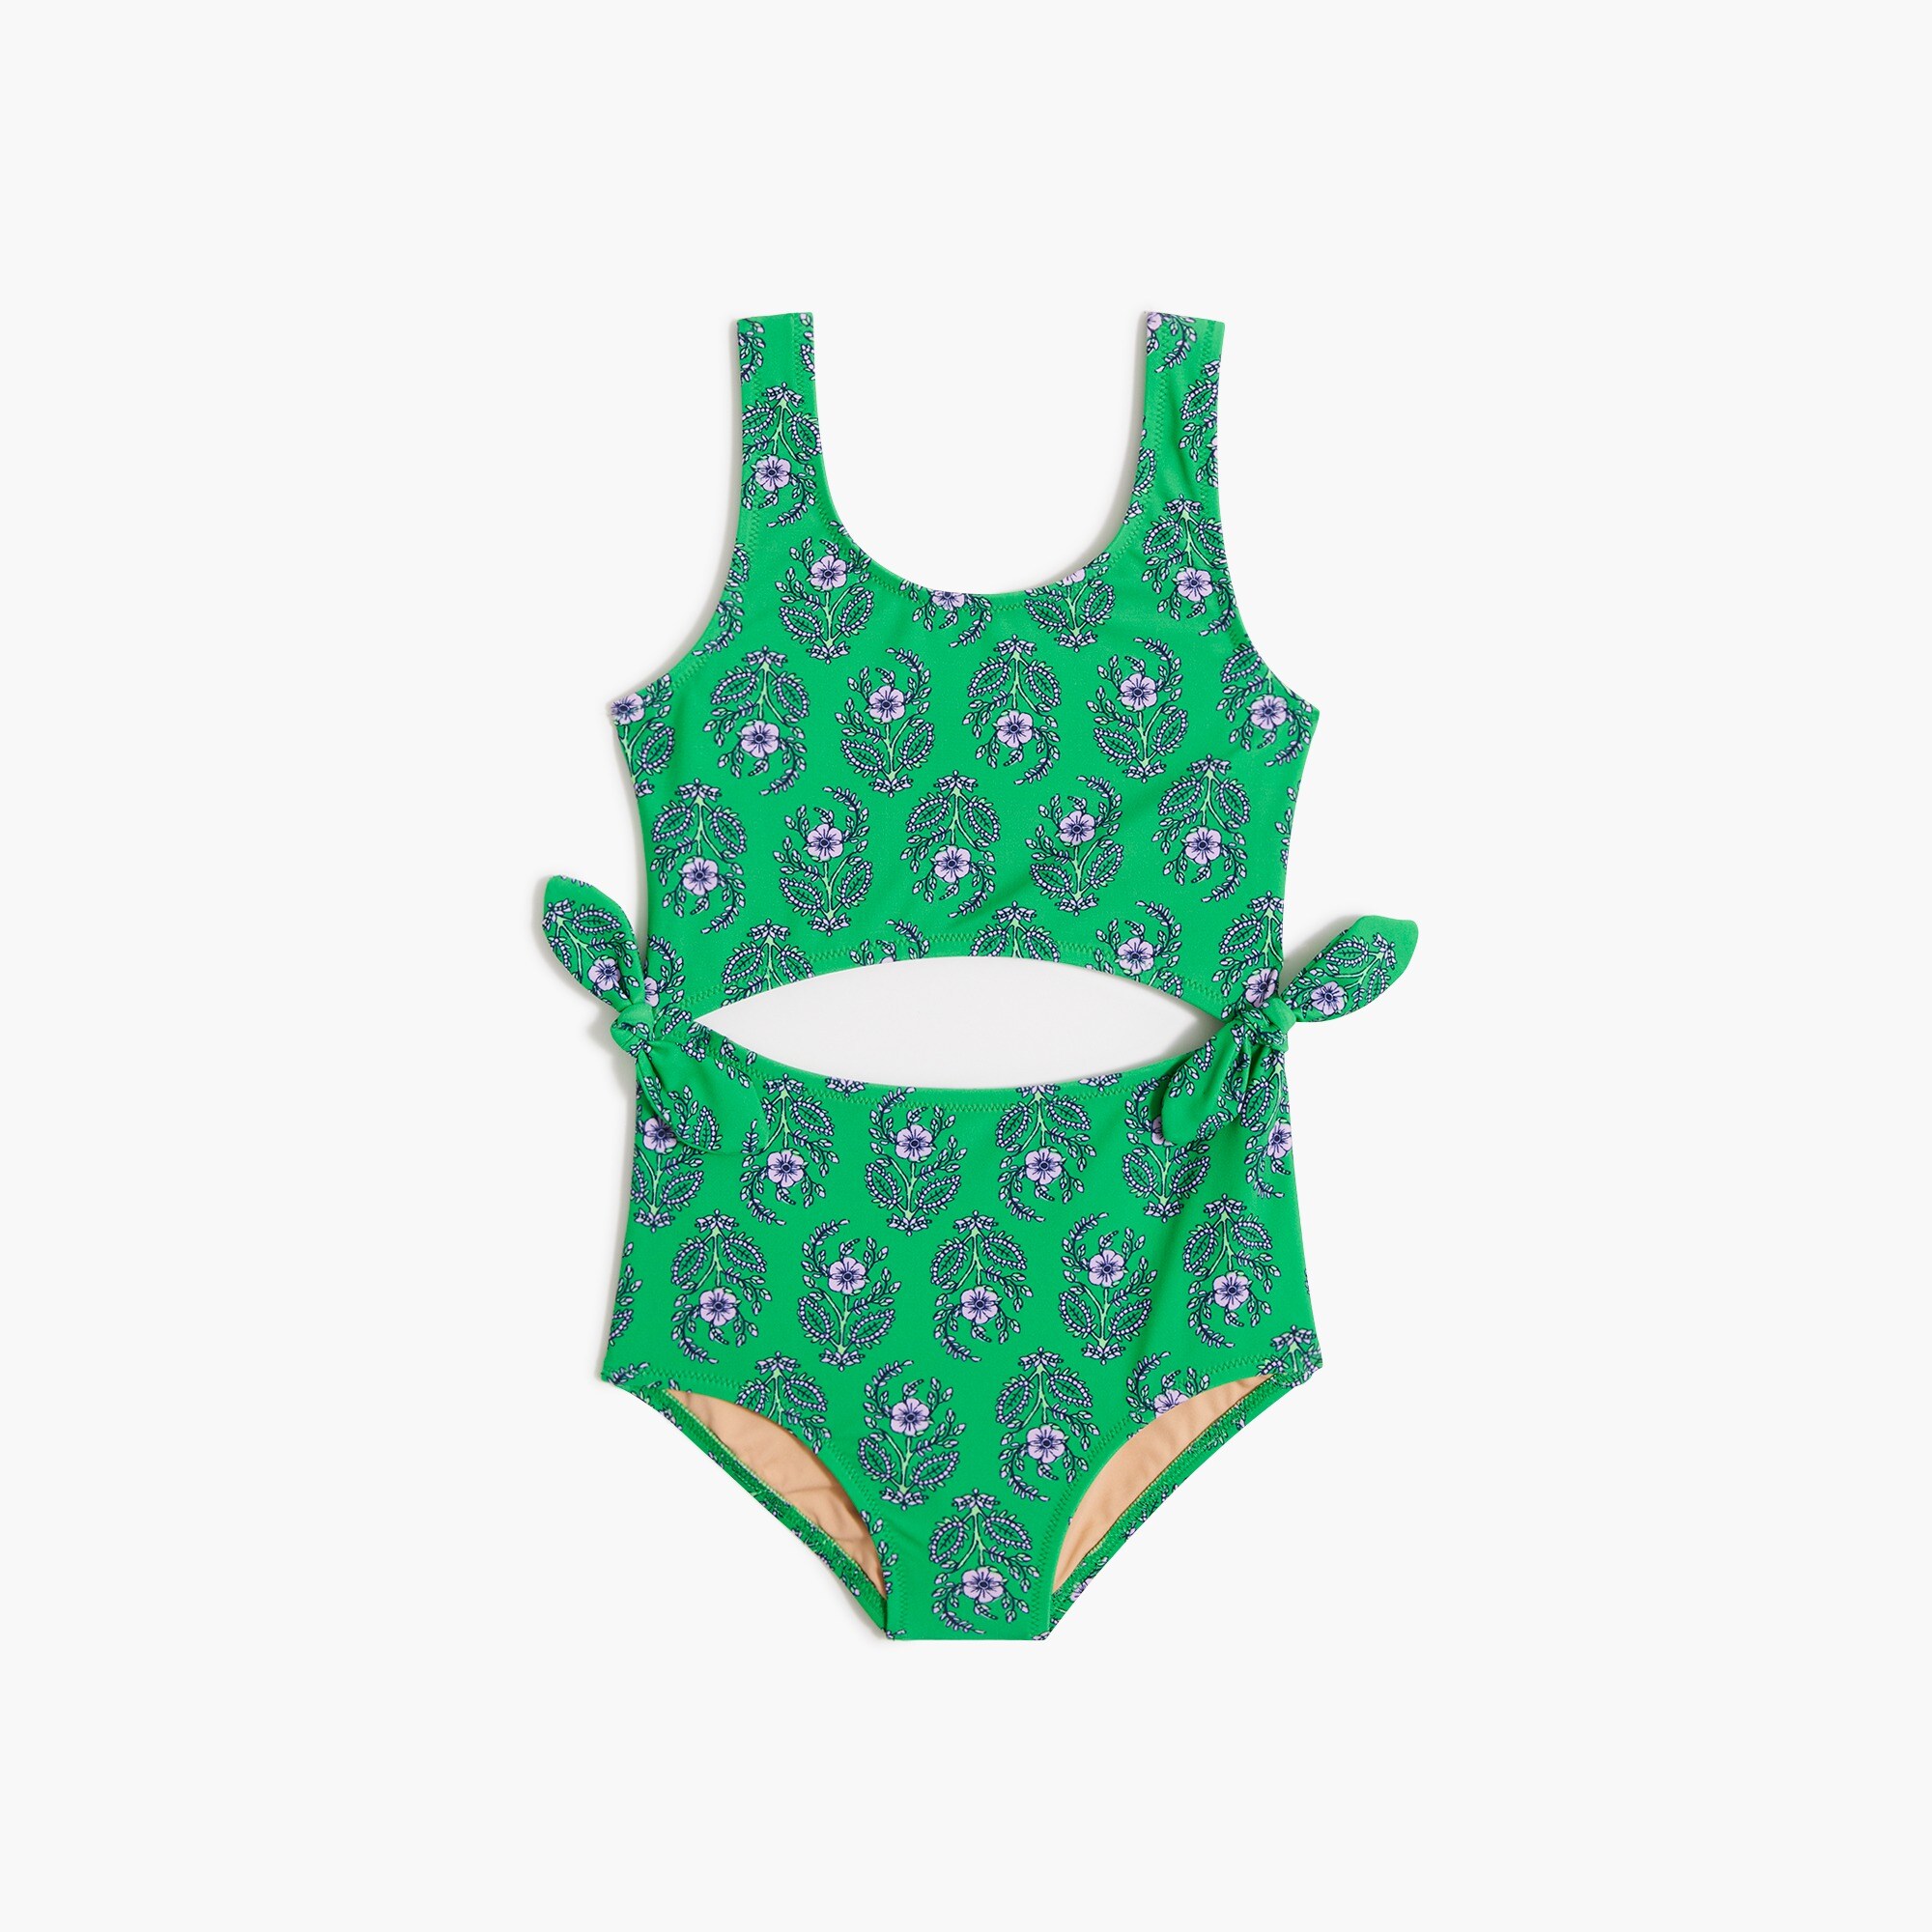  Girls' printed cutout one-piece swimsuit